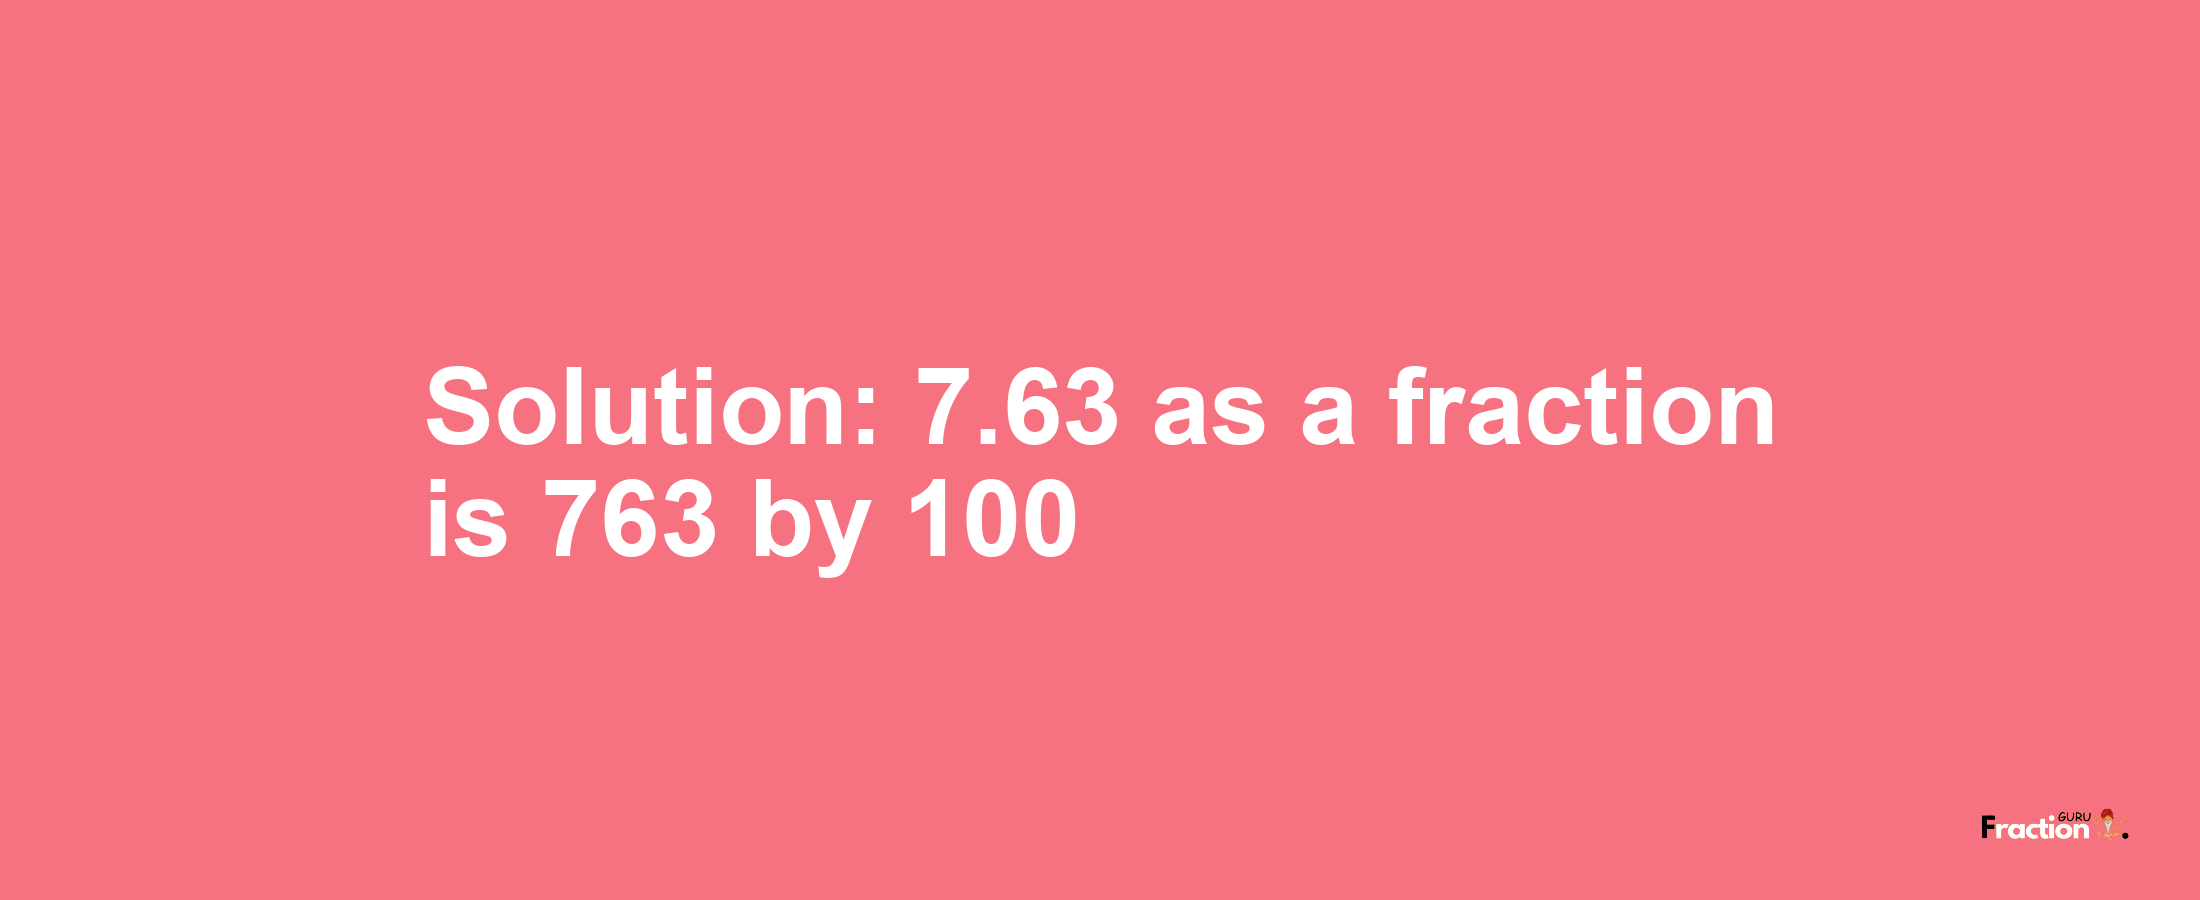 Solution:7.63 as a fraction is 763/100